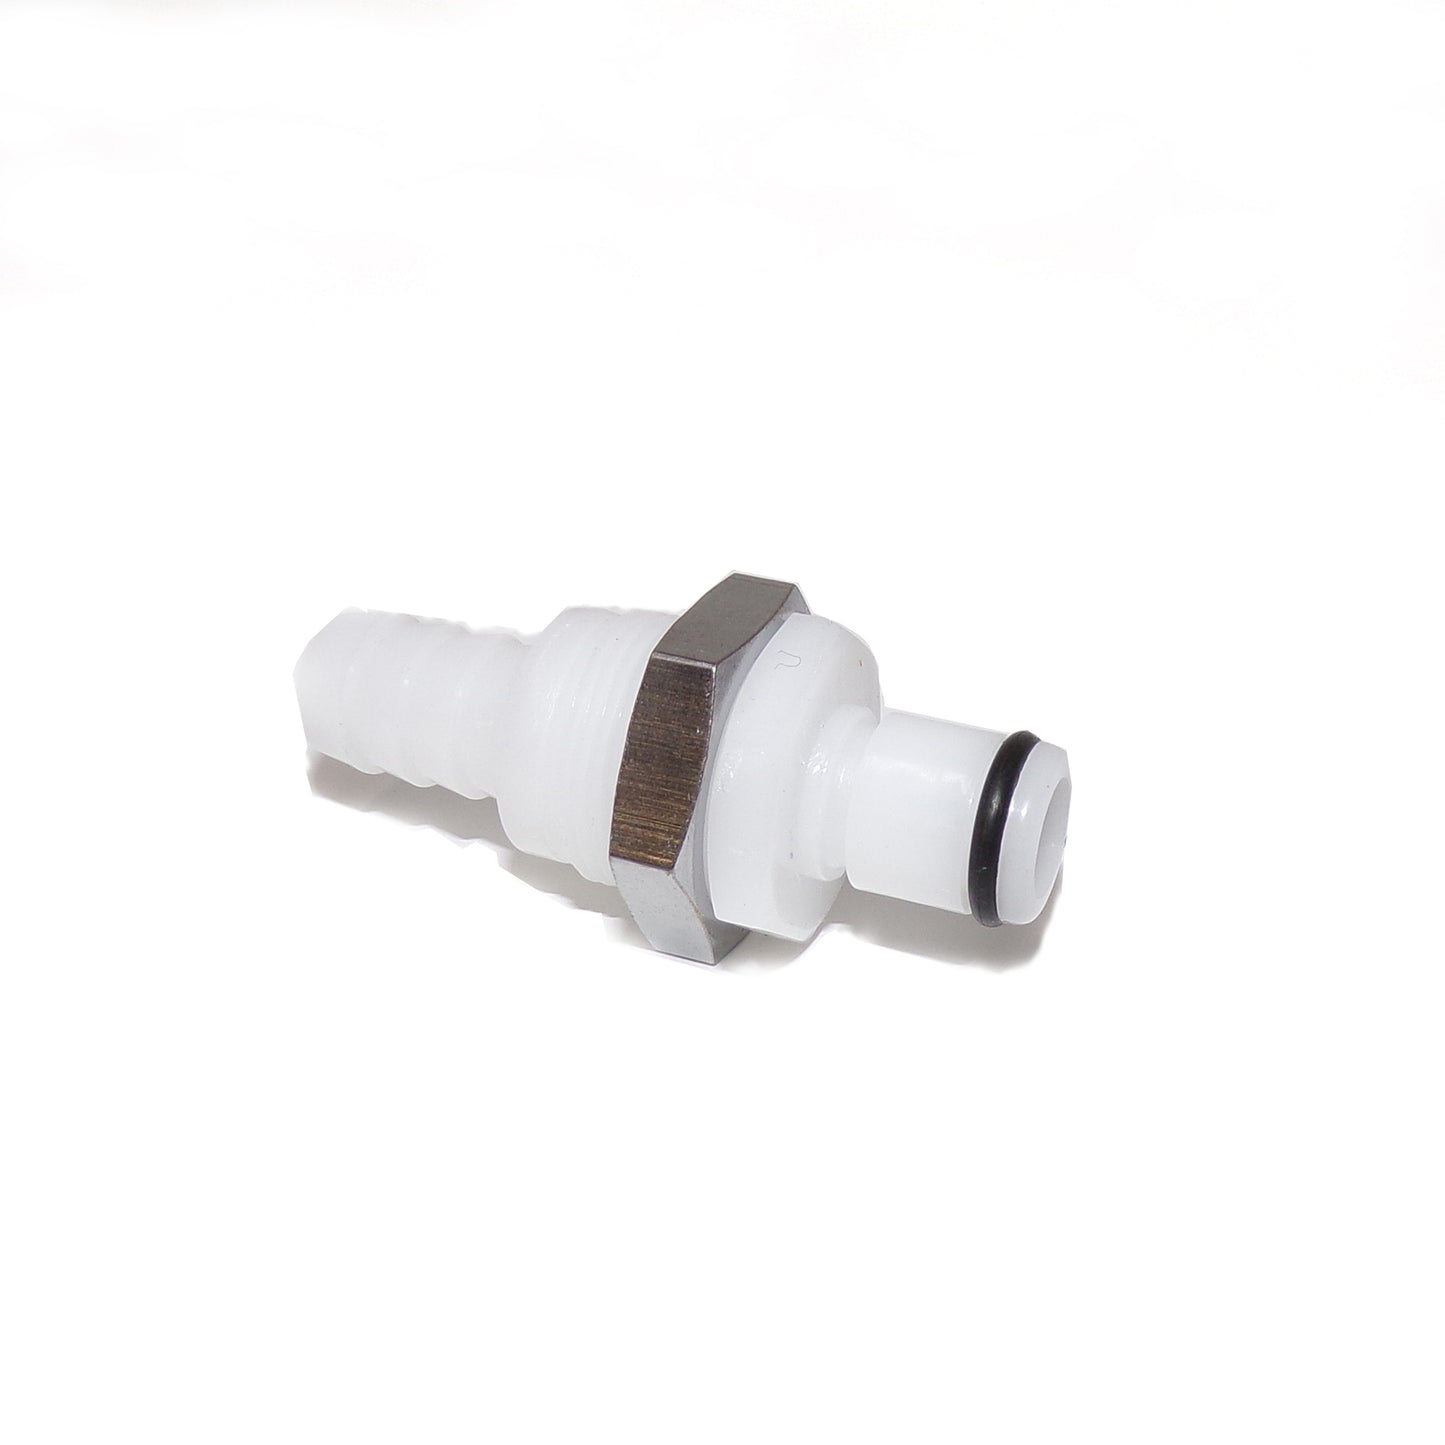 Male Connector for Drainage Hose for XPOWER LGR Dehumidifiers